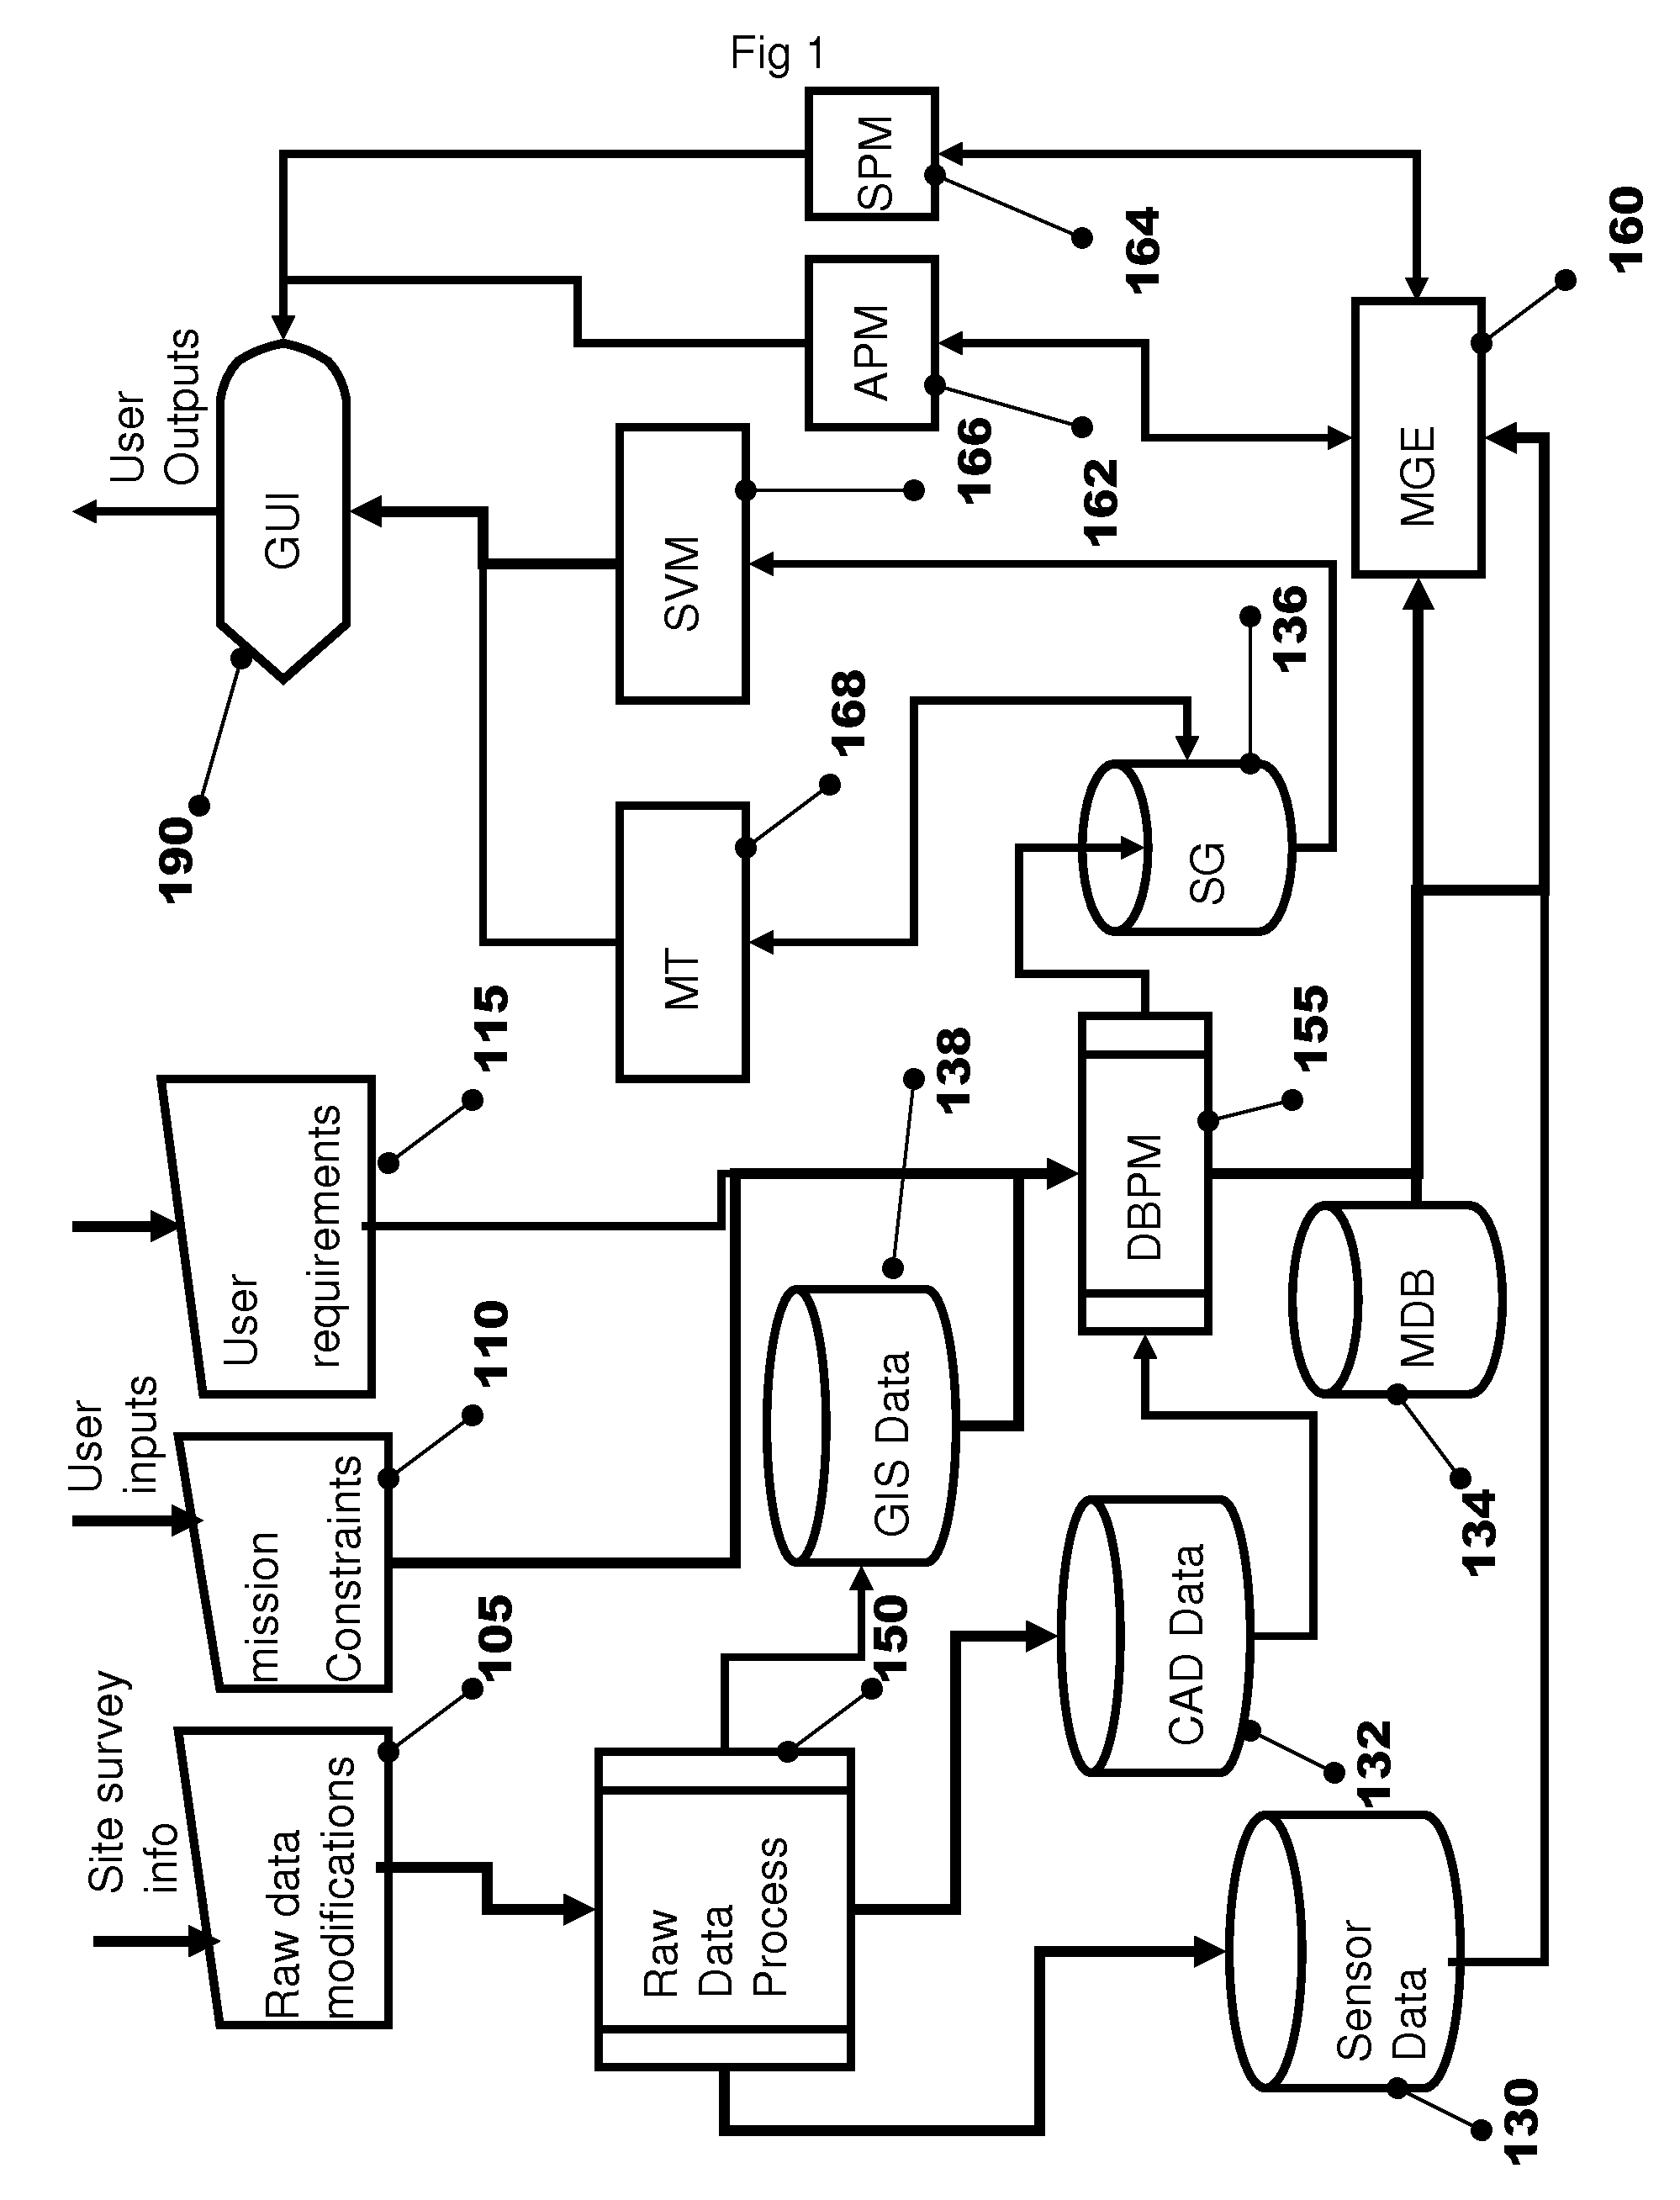 Method For Planning A Security Array Of Sensor Units